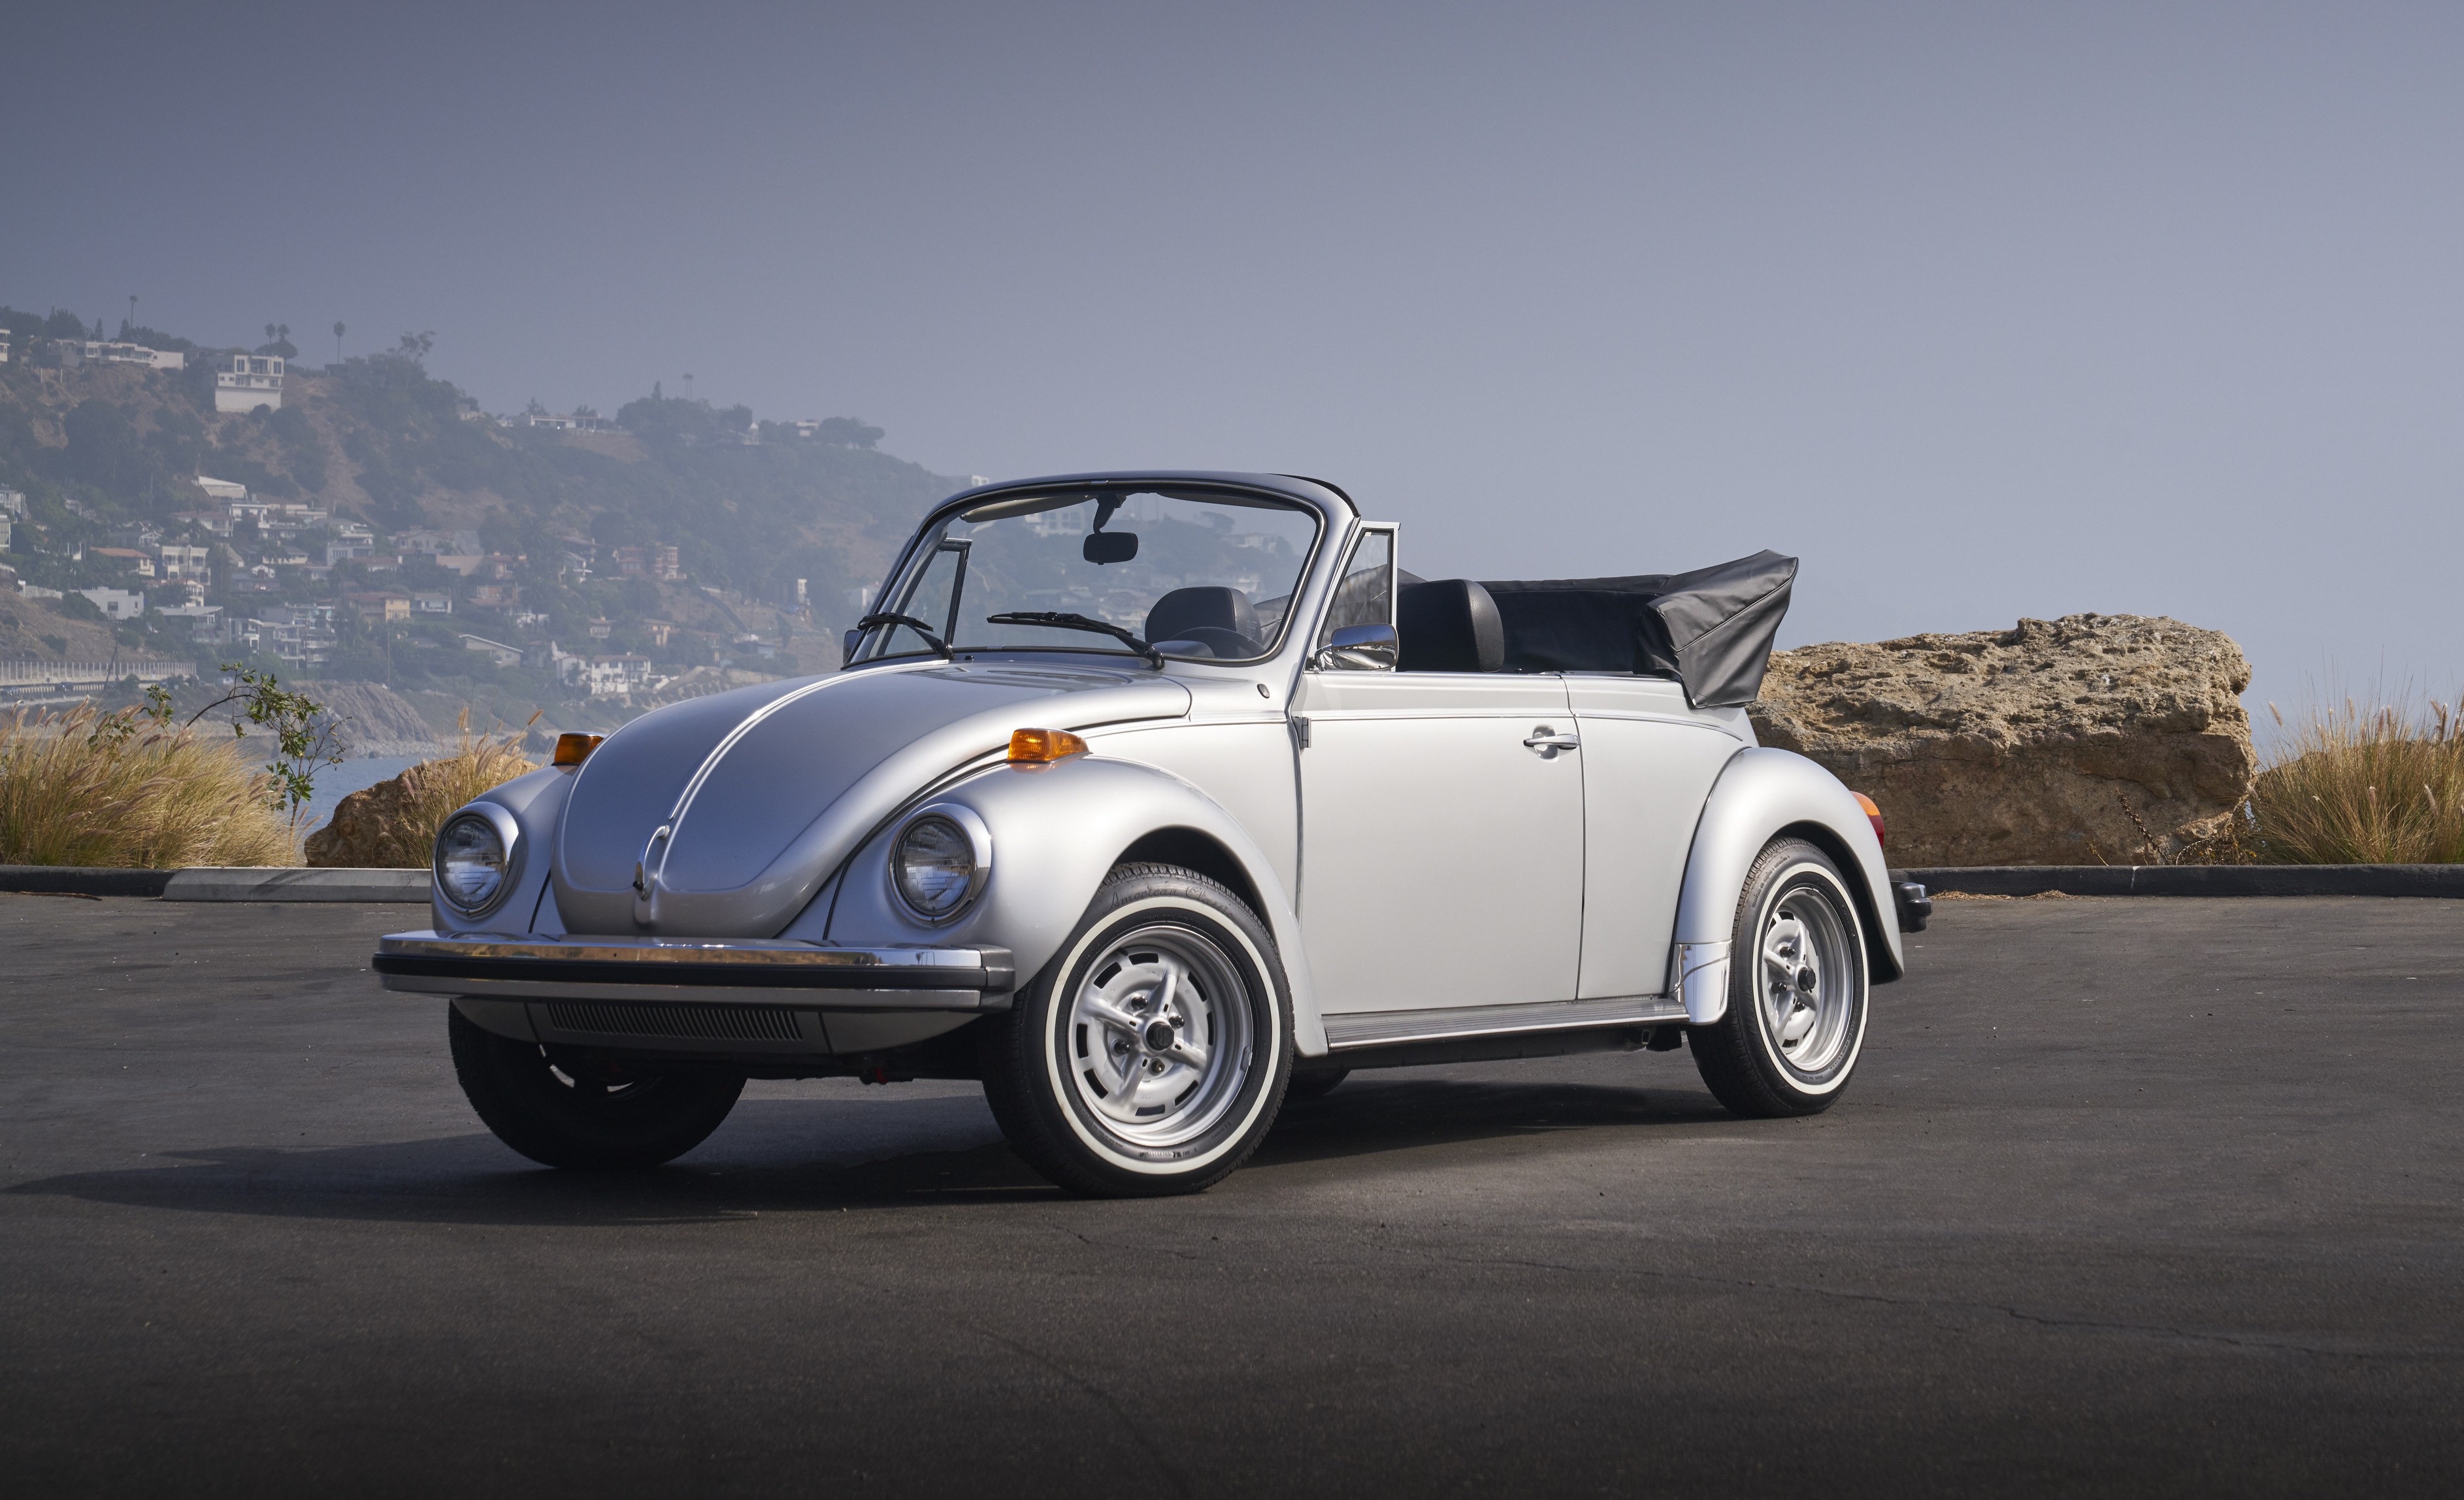 What to Look for When Buying a 1971-1979 Volkswagen Super Beetle